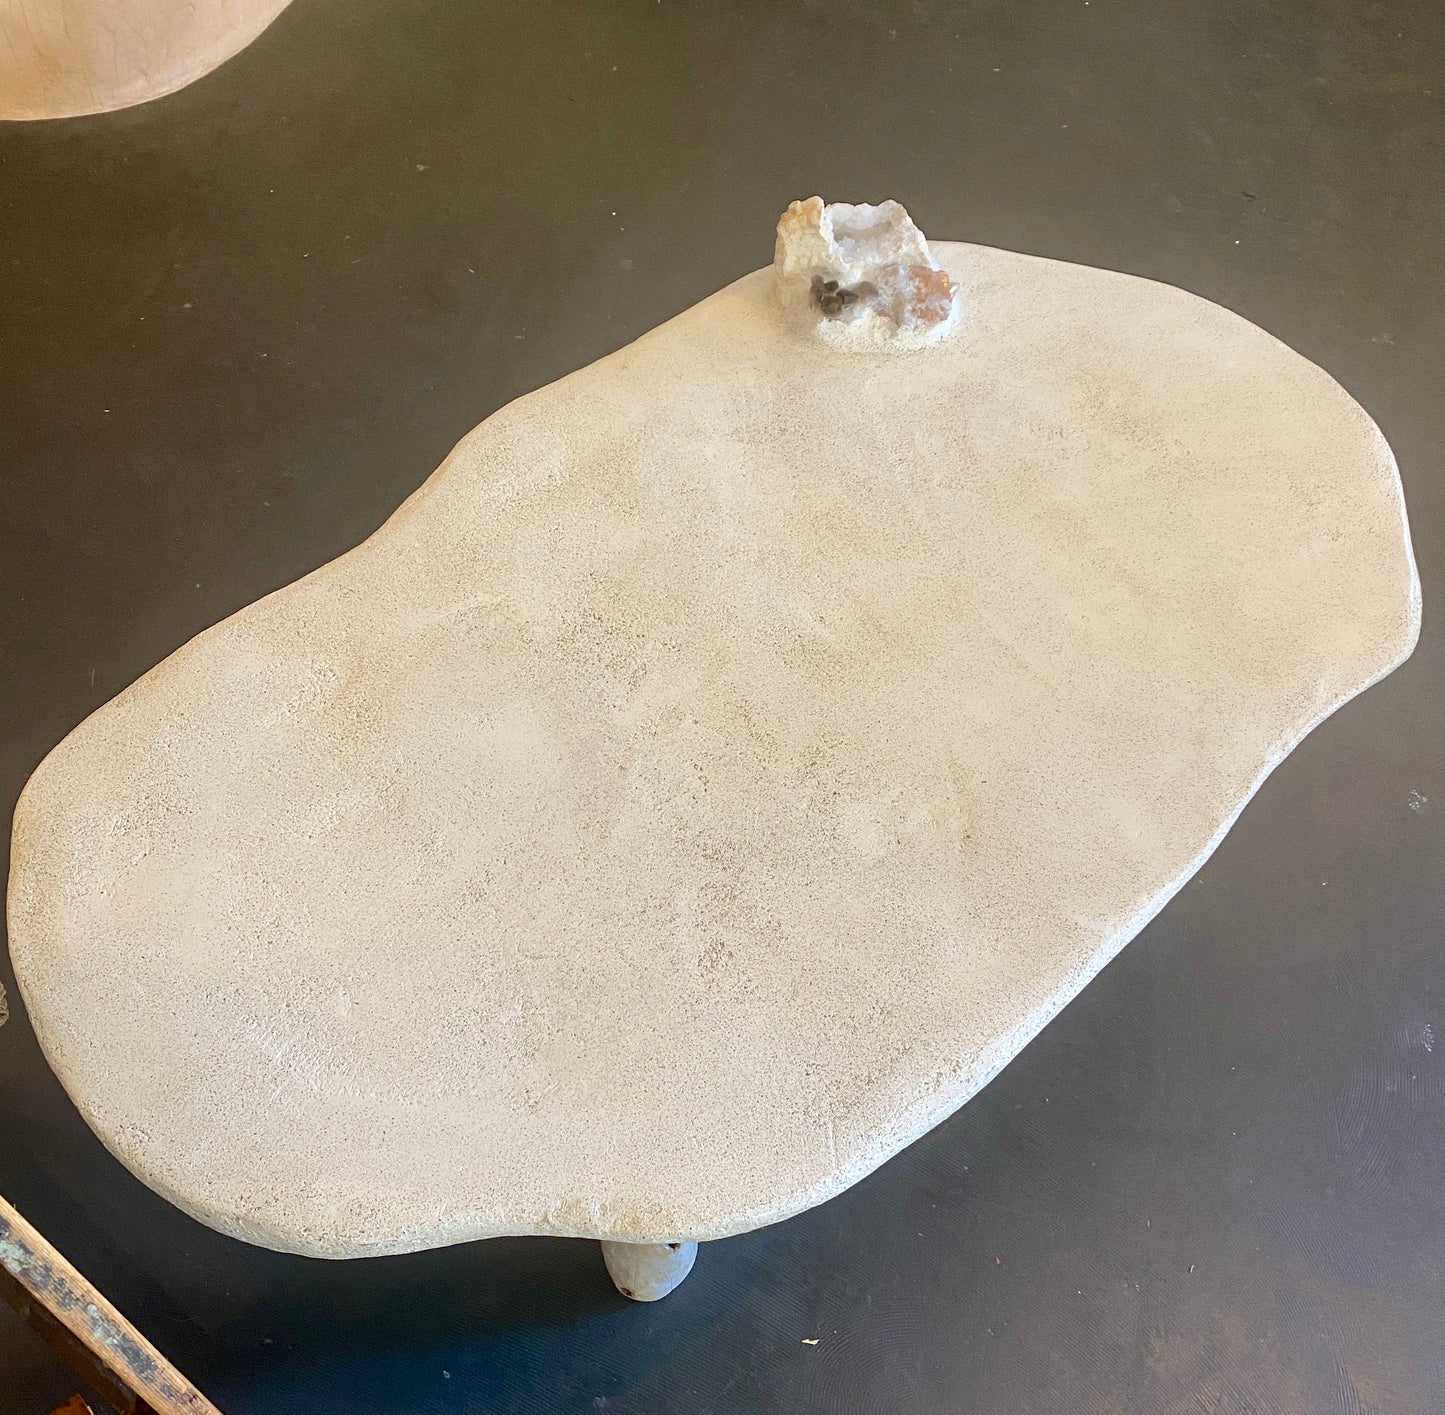 S + G Handcrafted Concrete, Stucco, Driftwood Table with Crystals